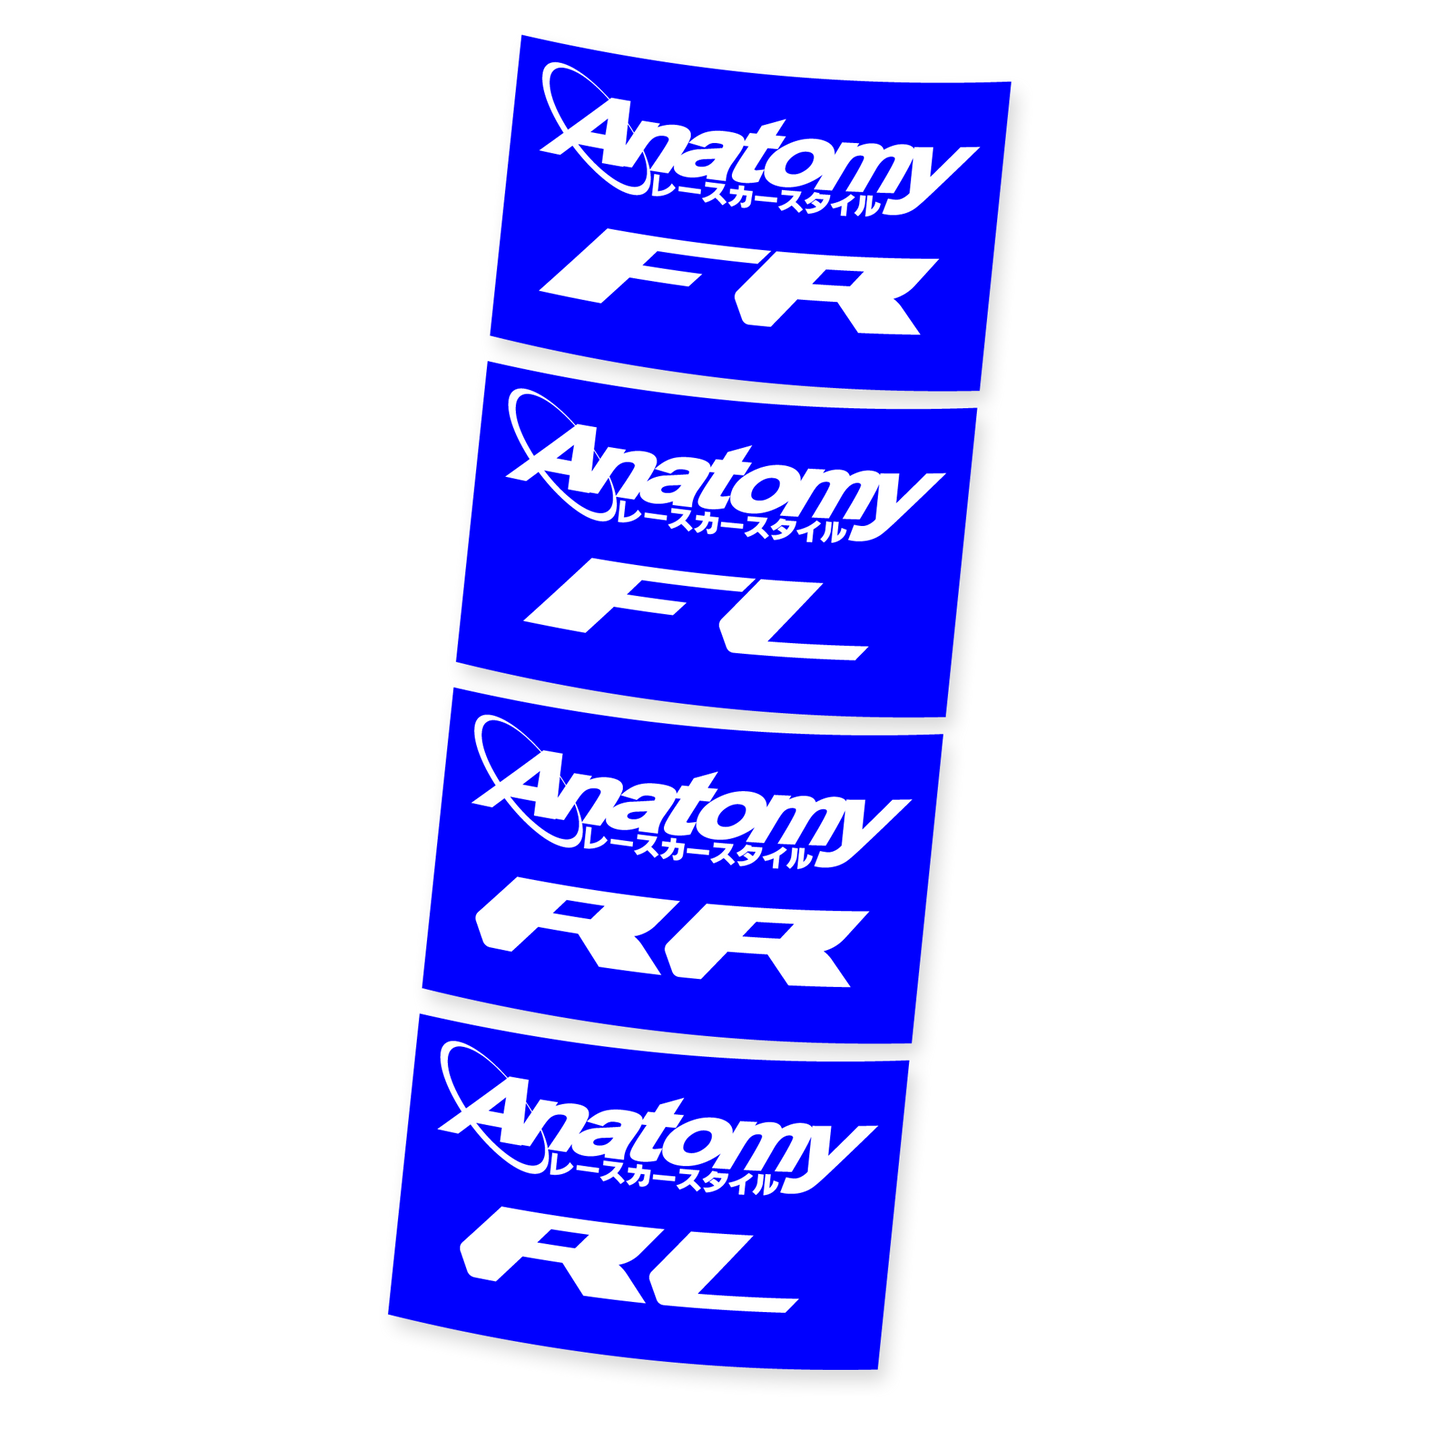 4 WHEEL DECALS FOR TIRE/WHEEL LOCATION  FR, FL, RR, RL  USED FOR TIRE USAGE AND WHEEL ROTATION